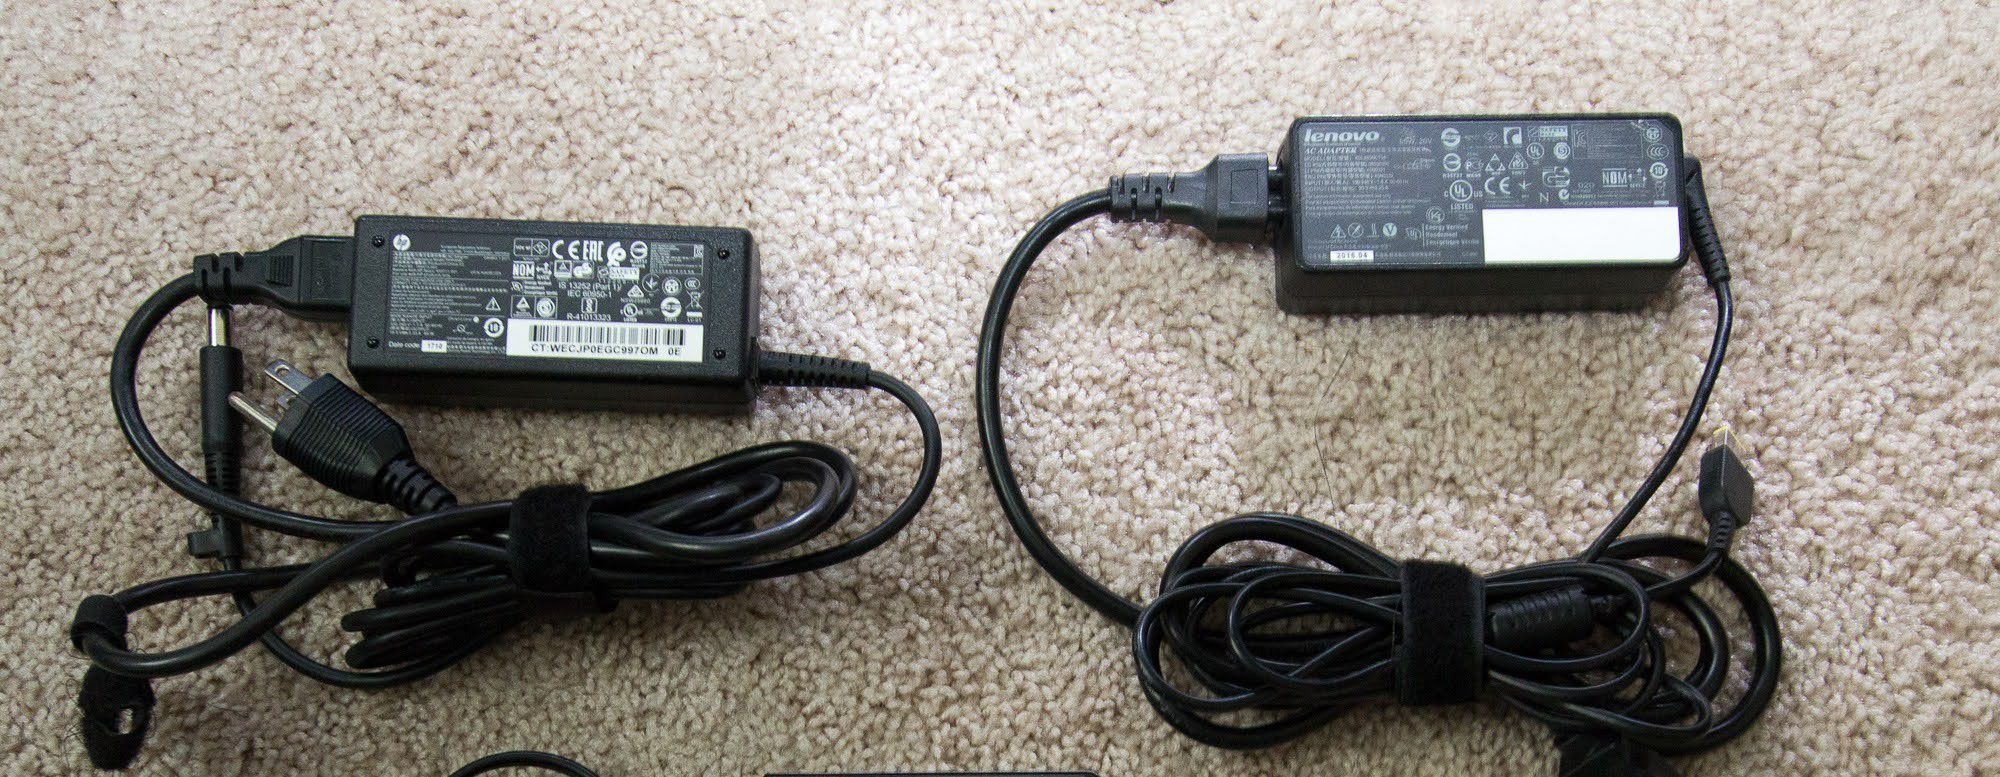 Lenovo and HP laptop chargers